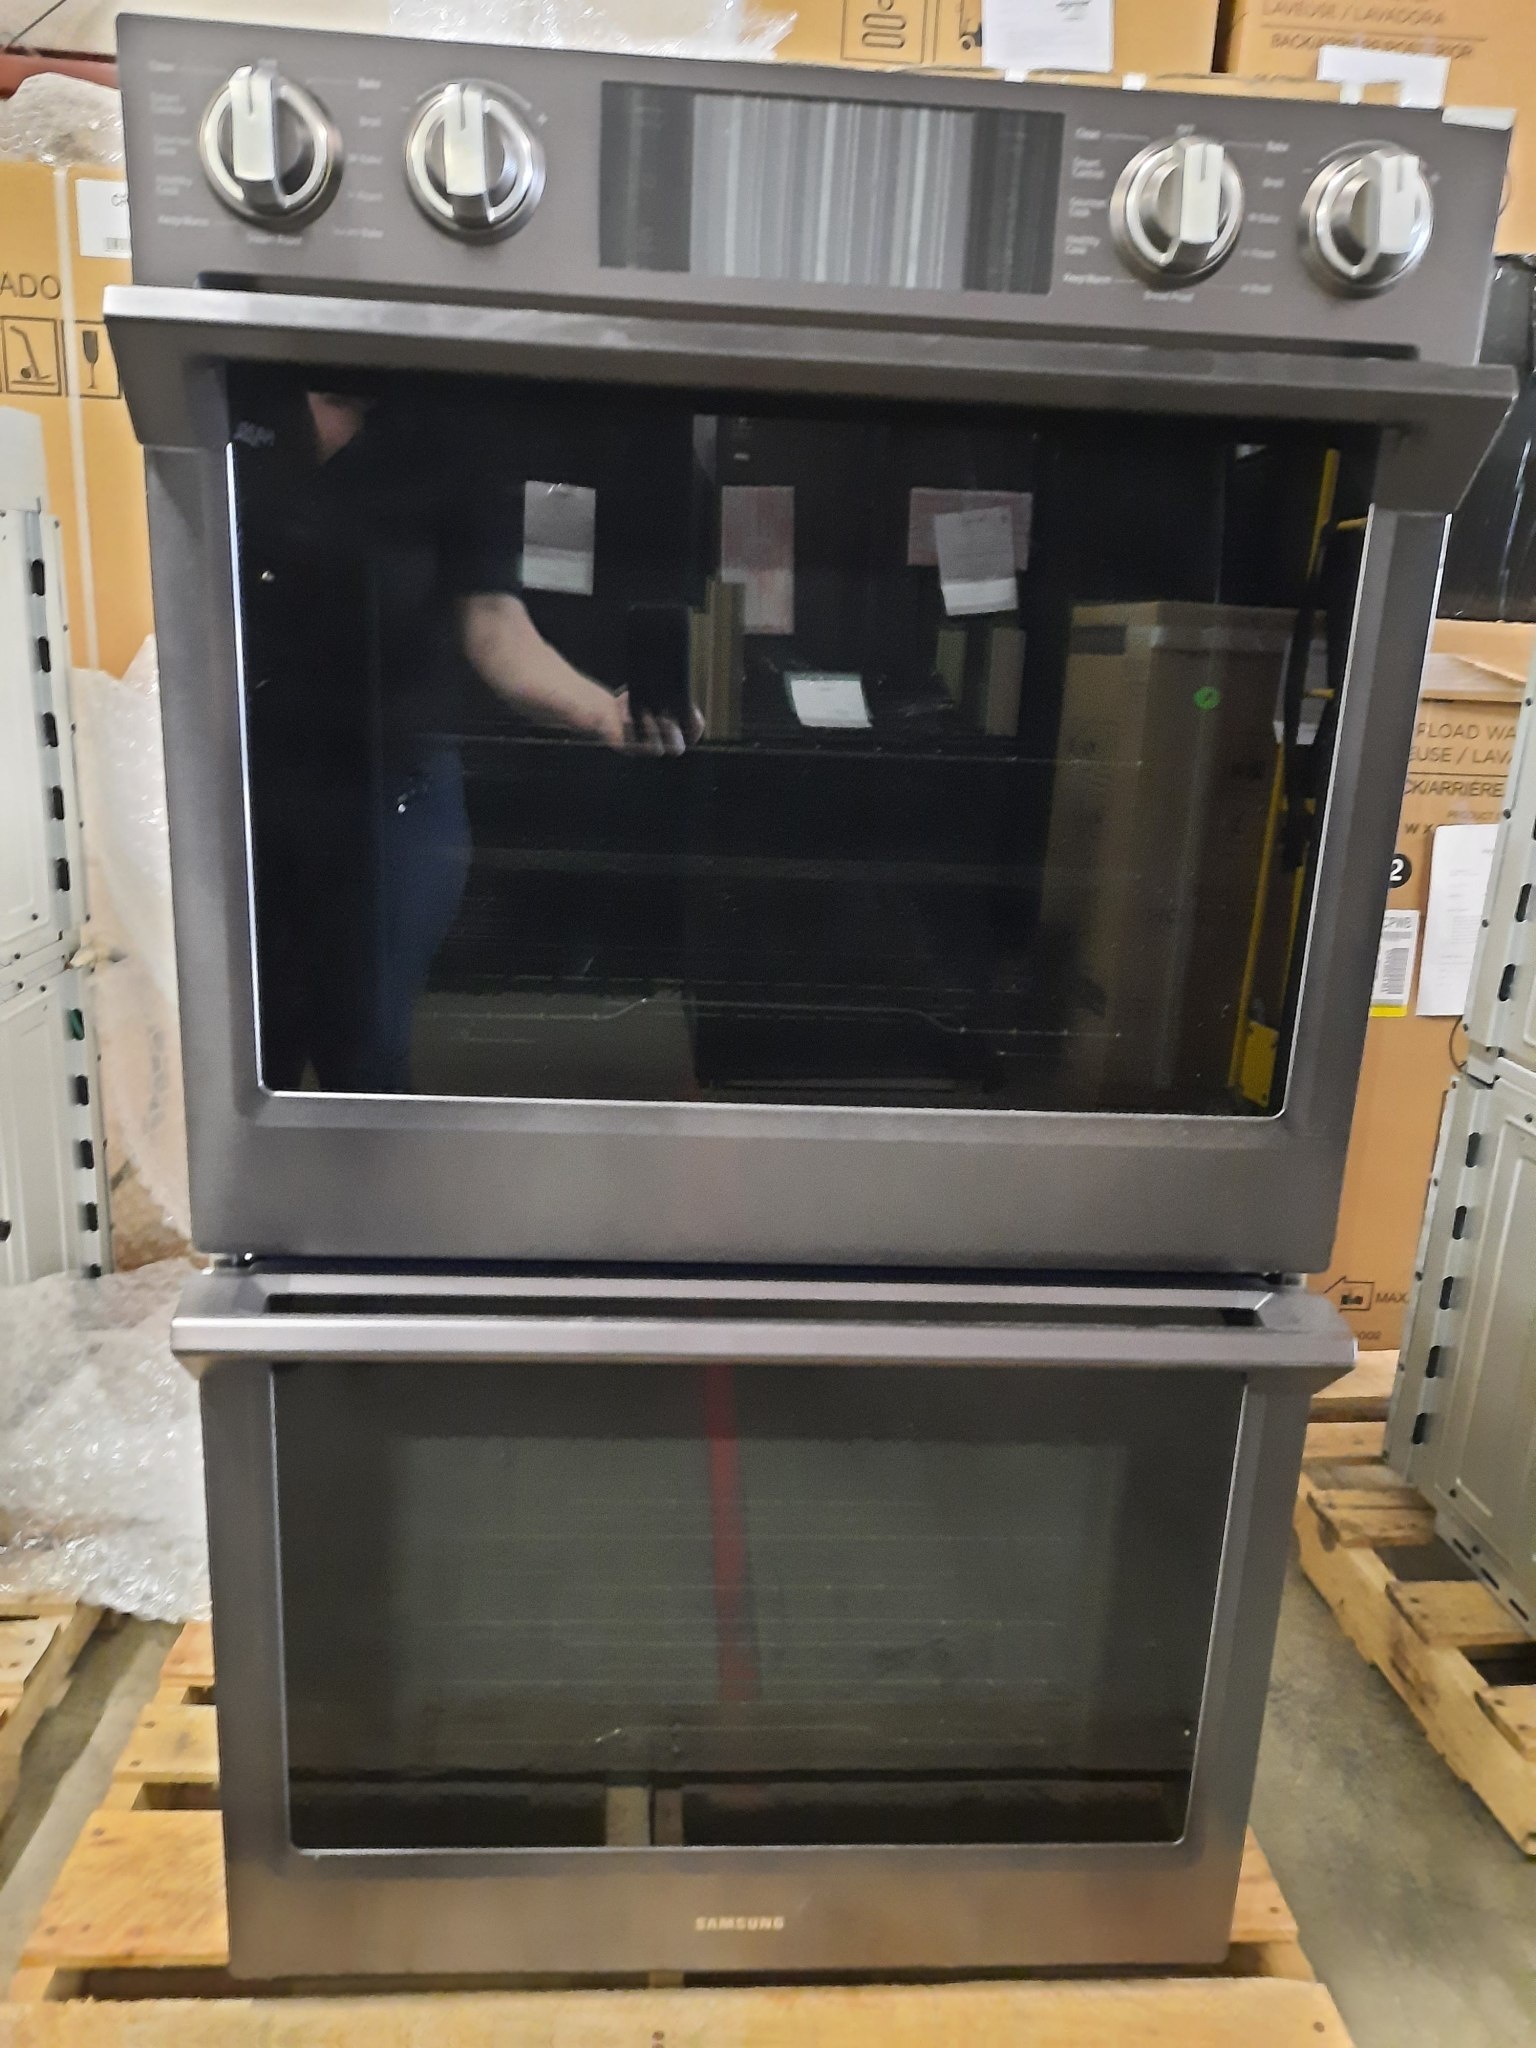 Samsung *SAMSUNG  NV51K7770DG/AA   *refurbished*  30 in. Double Electric Wall Oven with Steam Cook, Flex Duo and Dual Convection in Fingerprint Resistant Black Stainless